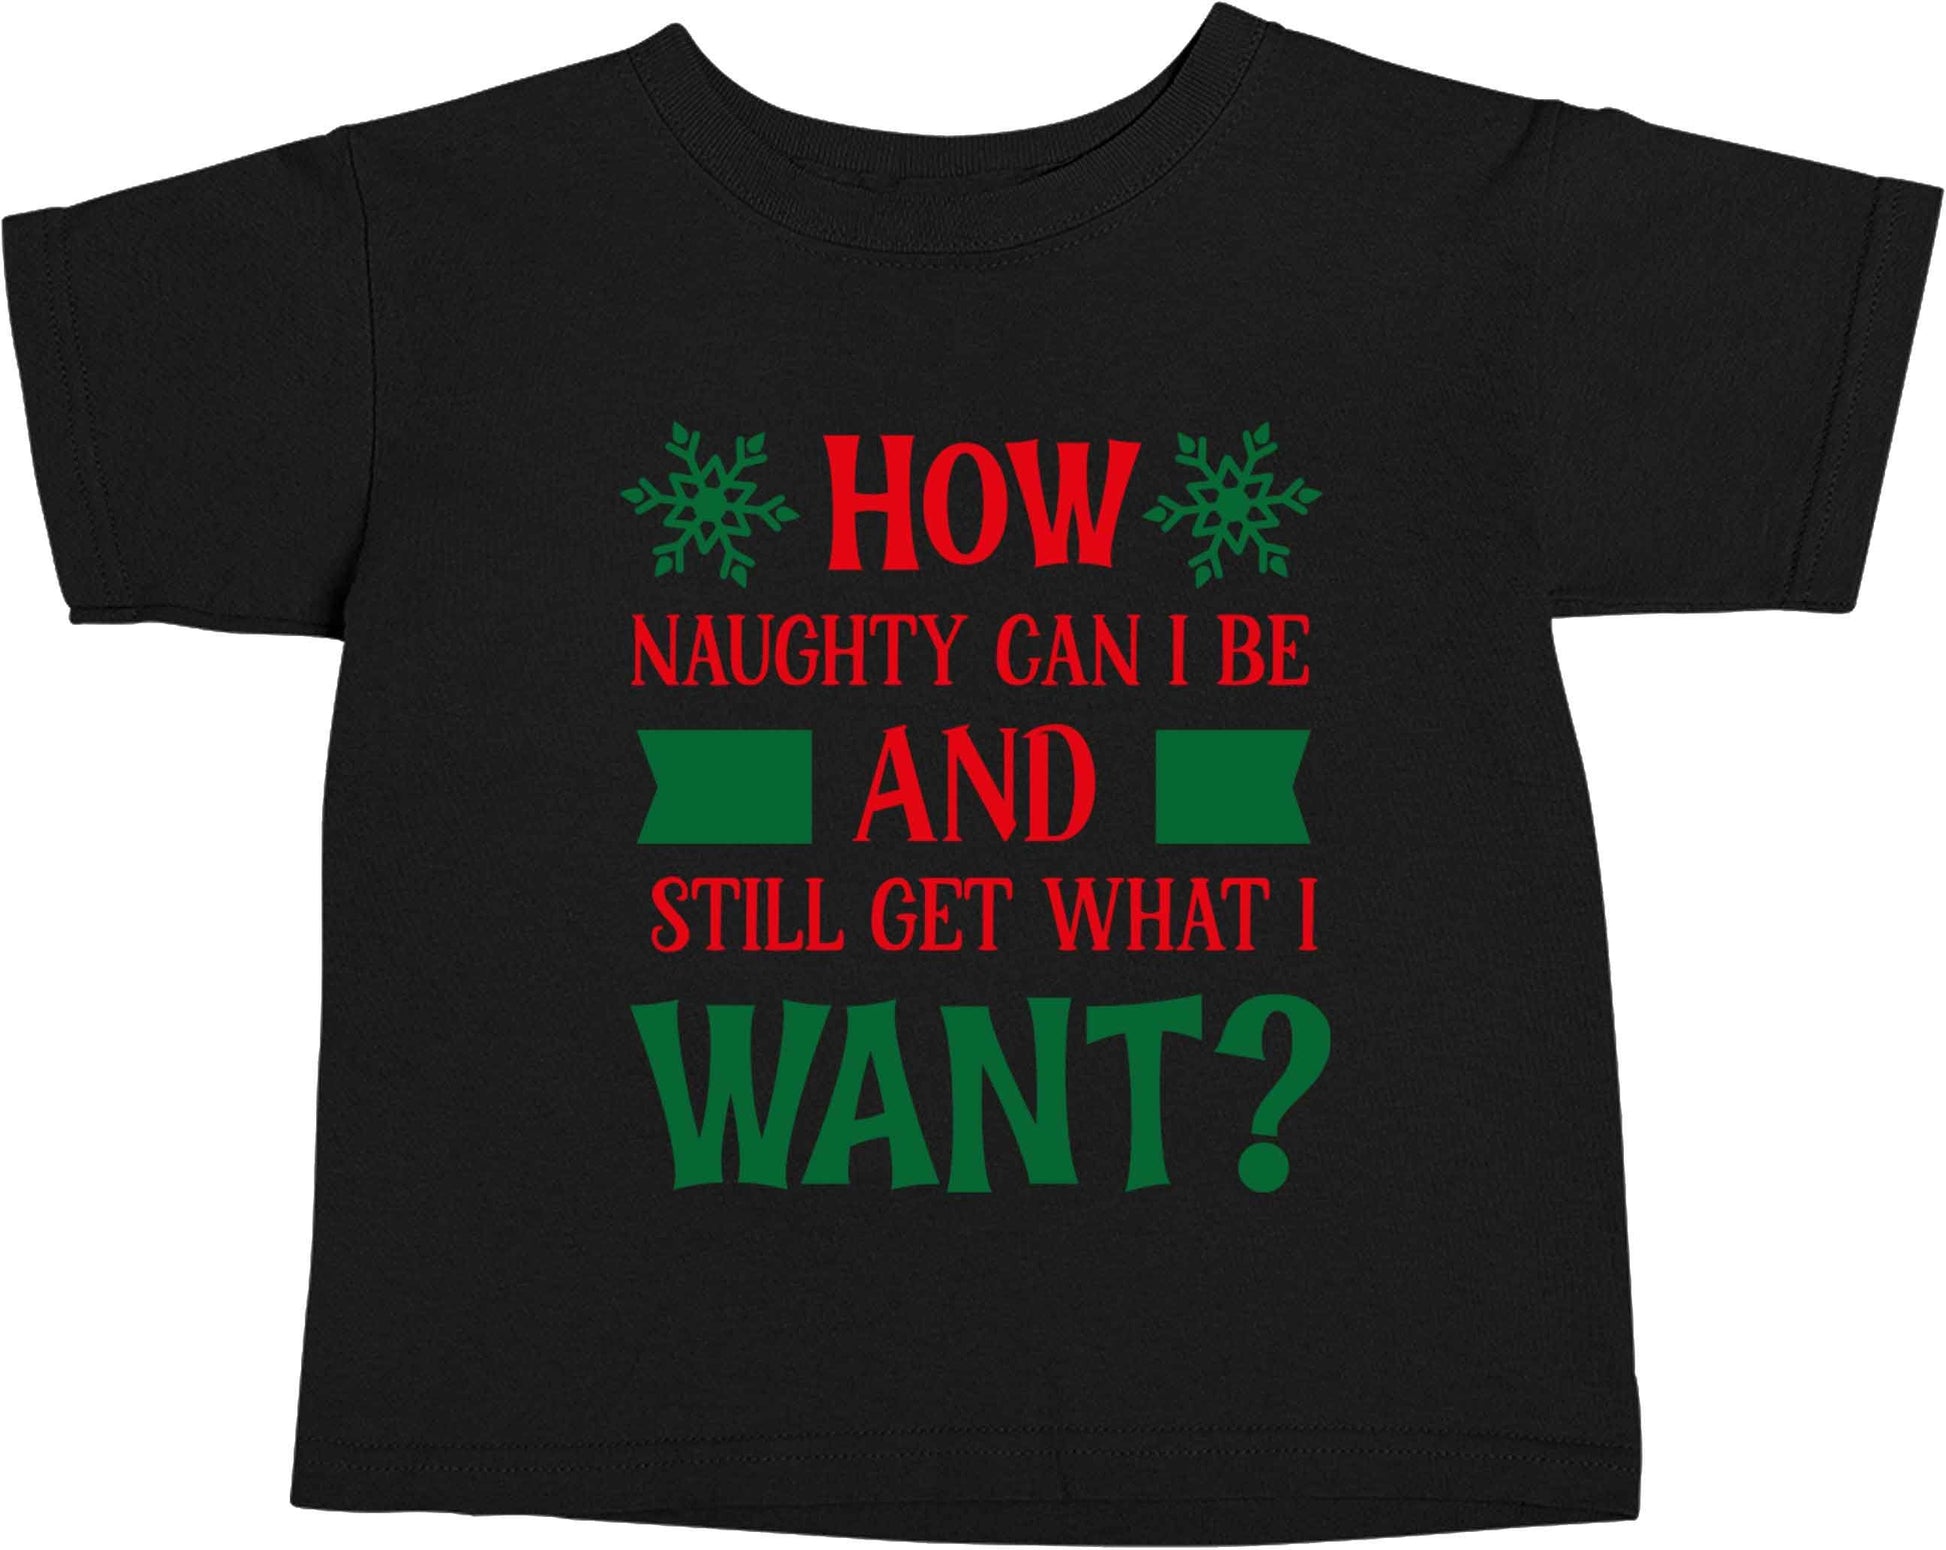 How naughty can I be and still get what I want? Black baby toddler Tshirt 2 years